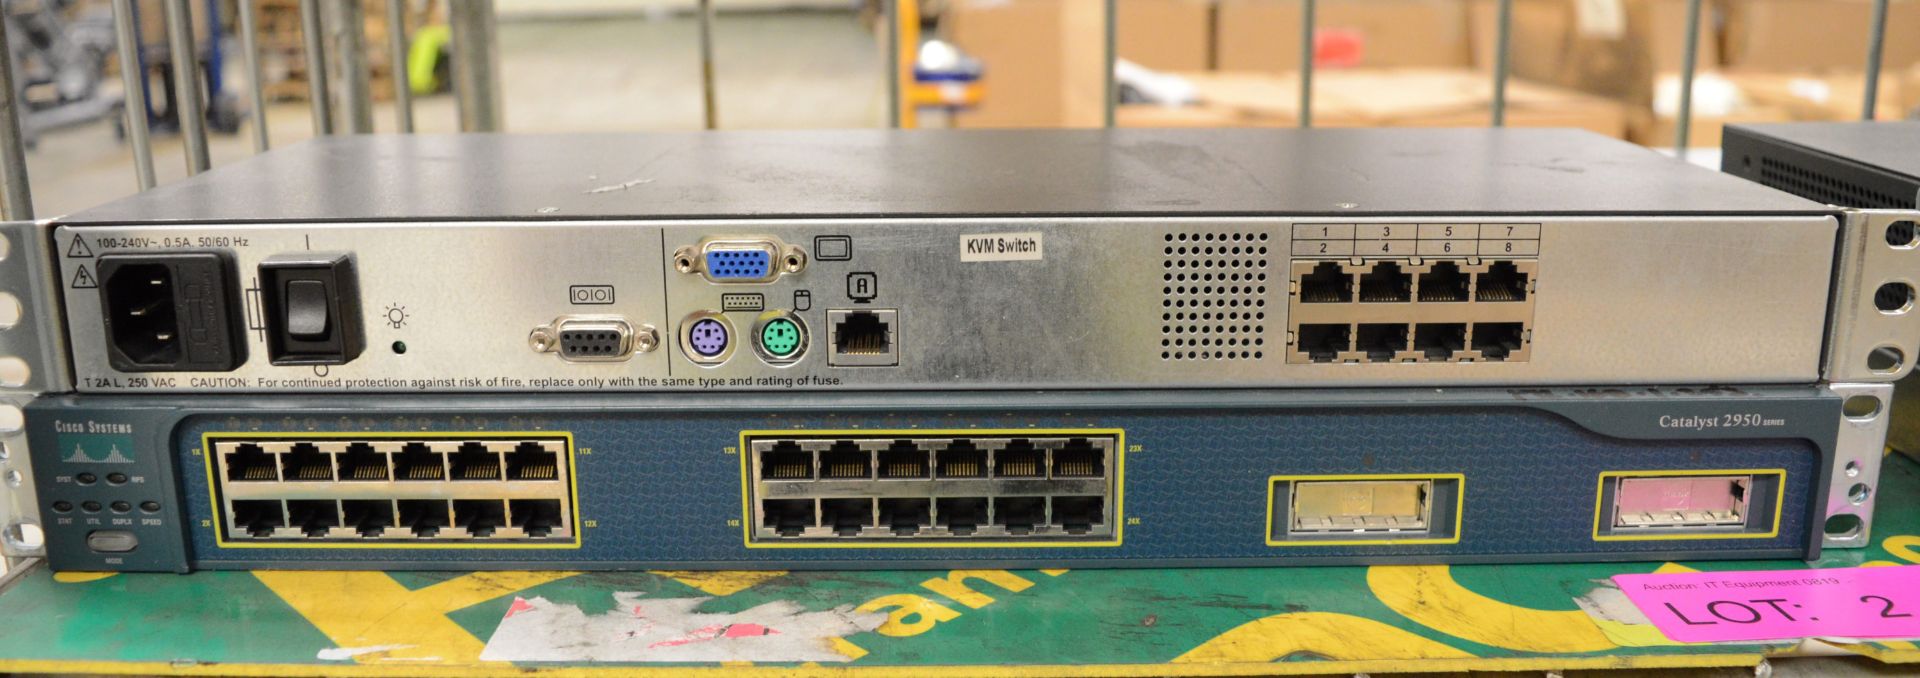 Network Hubs - Cisco Systems Catalyst 2950, HP KVM Switch, HP ProCurve Switch 1800-24G, De - Image 2 of 5